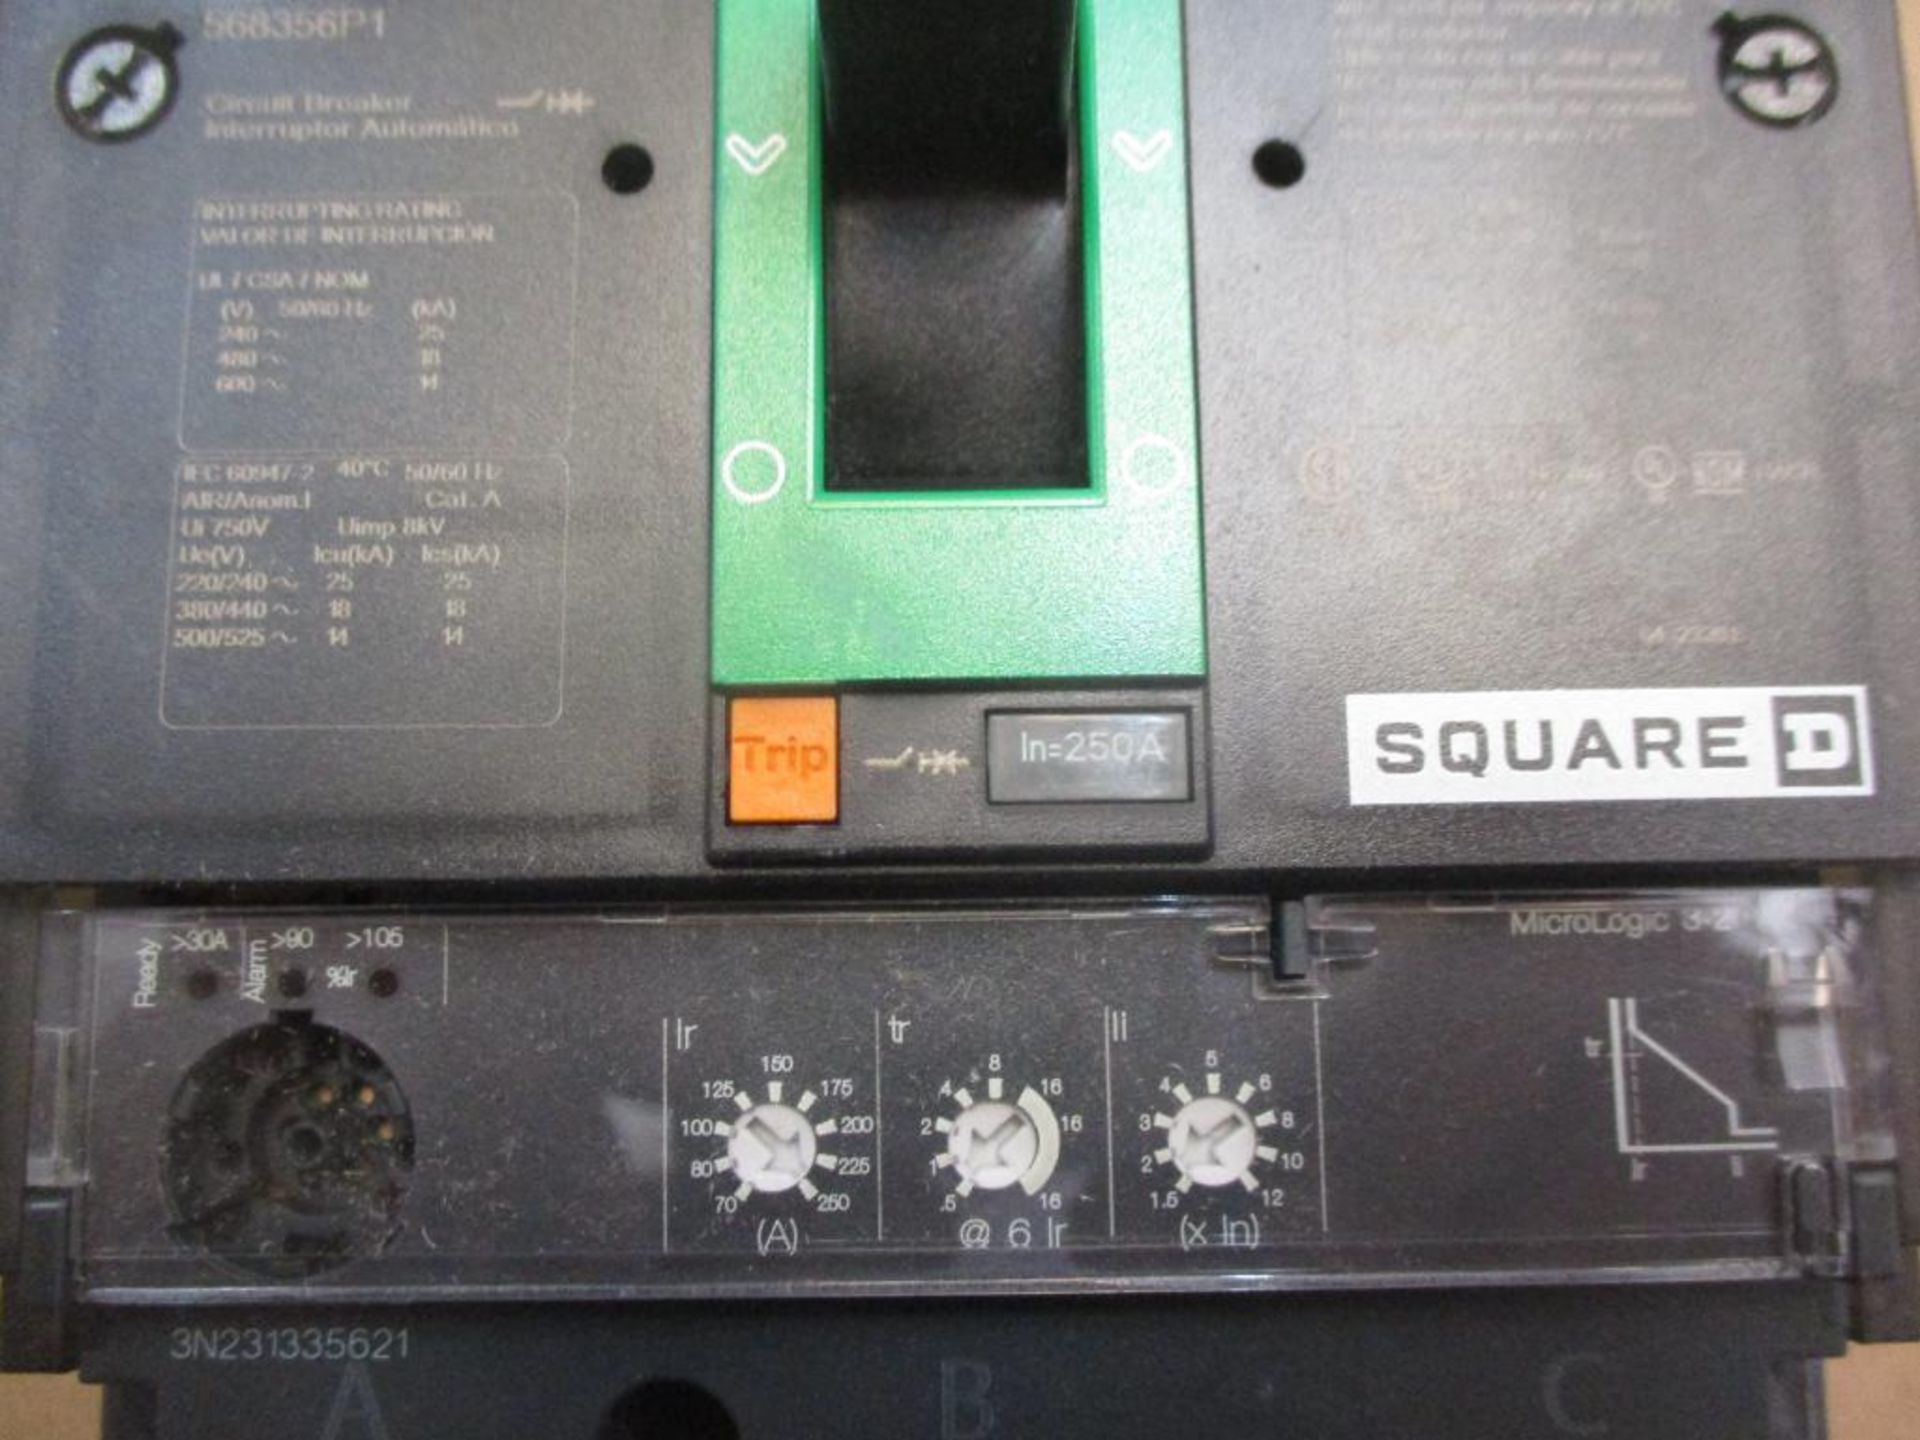 Square D 250 AMP Circuit Breaker, 568356P1, 3P, 250A, 600VAC, PawerPacT (New in Box) - Image 3 of 4